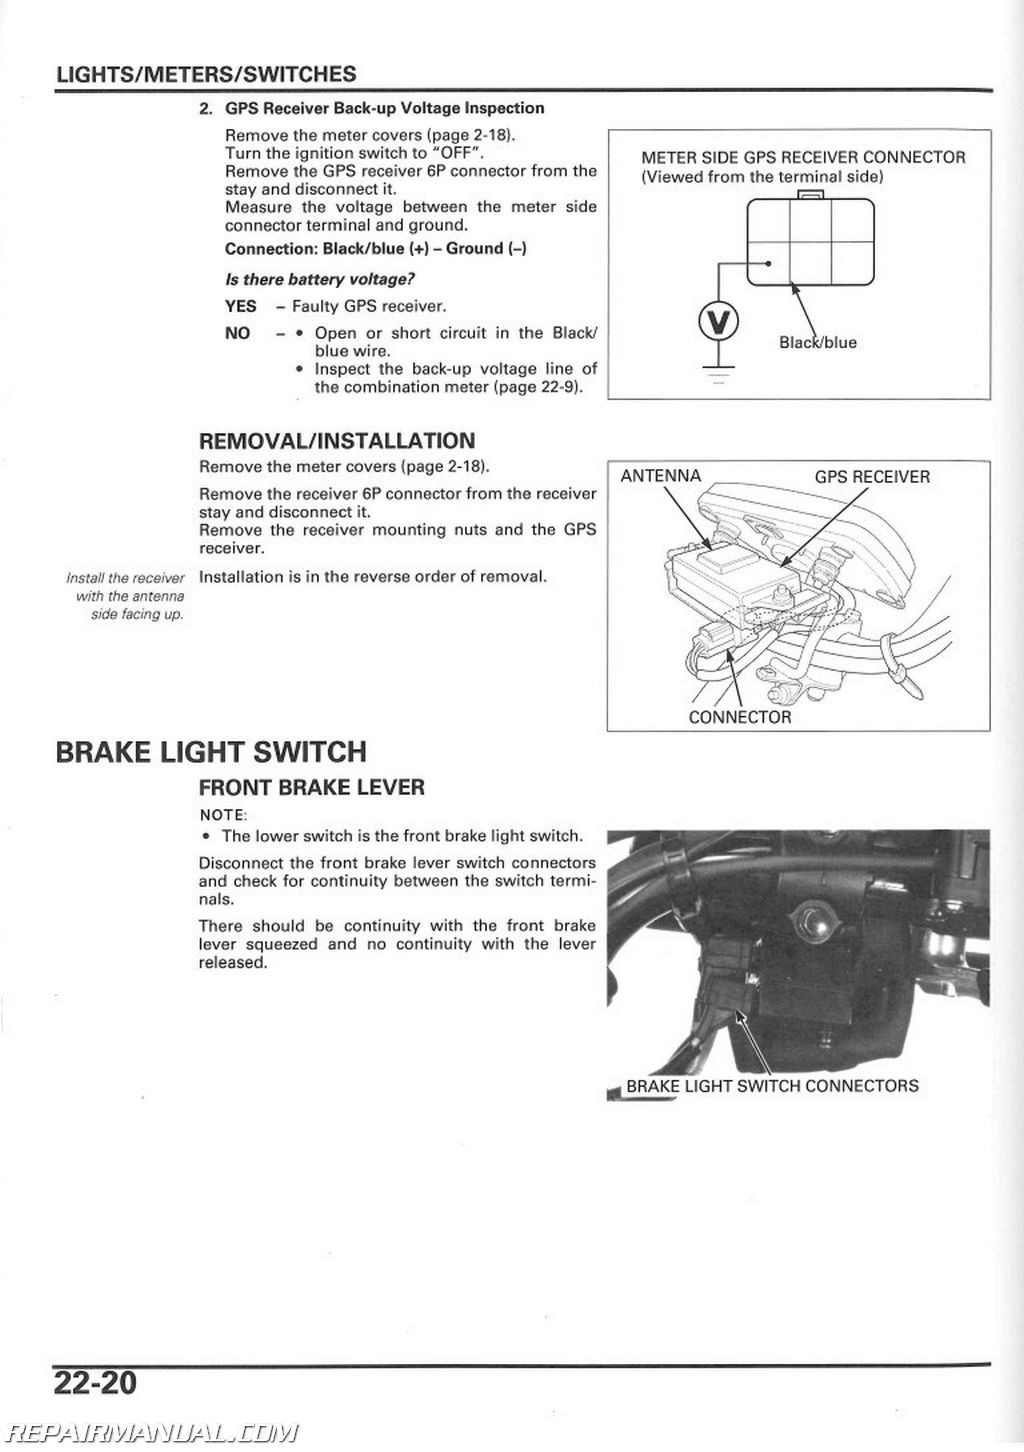 Power Wheels Motorcycle Wiring Diagram | Motor Repalcement Parts And ...